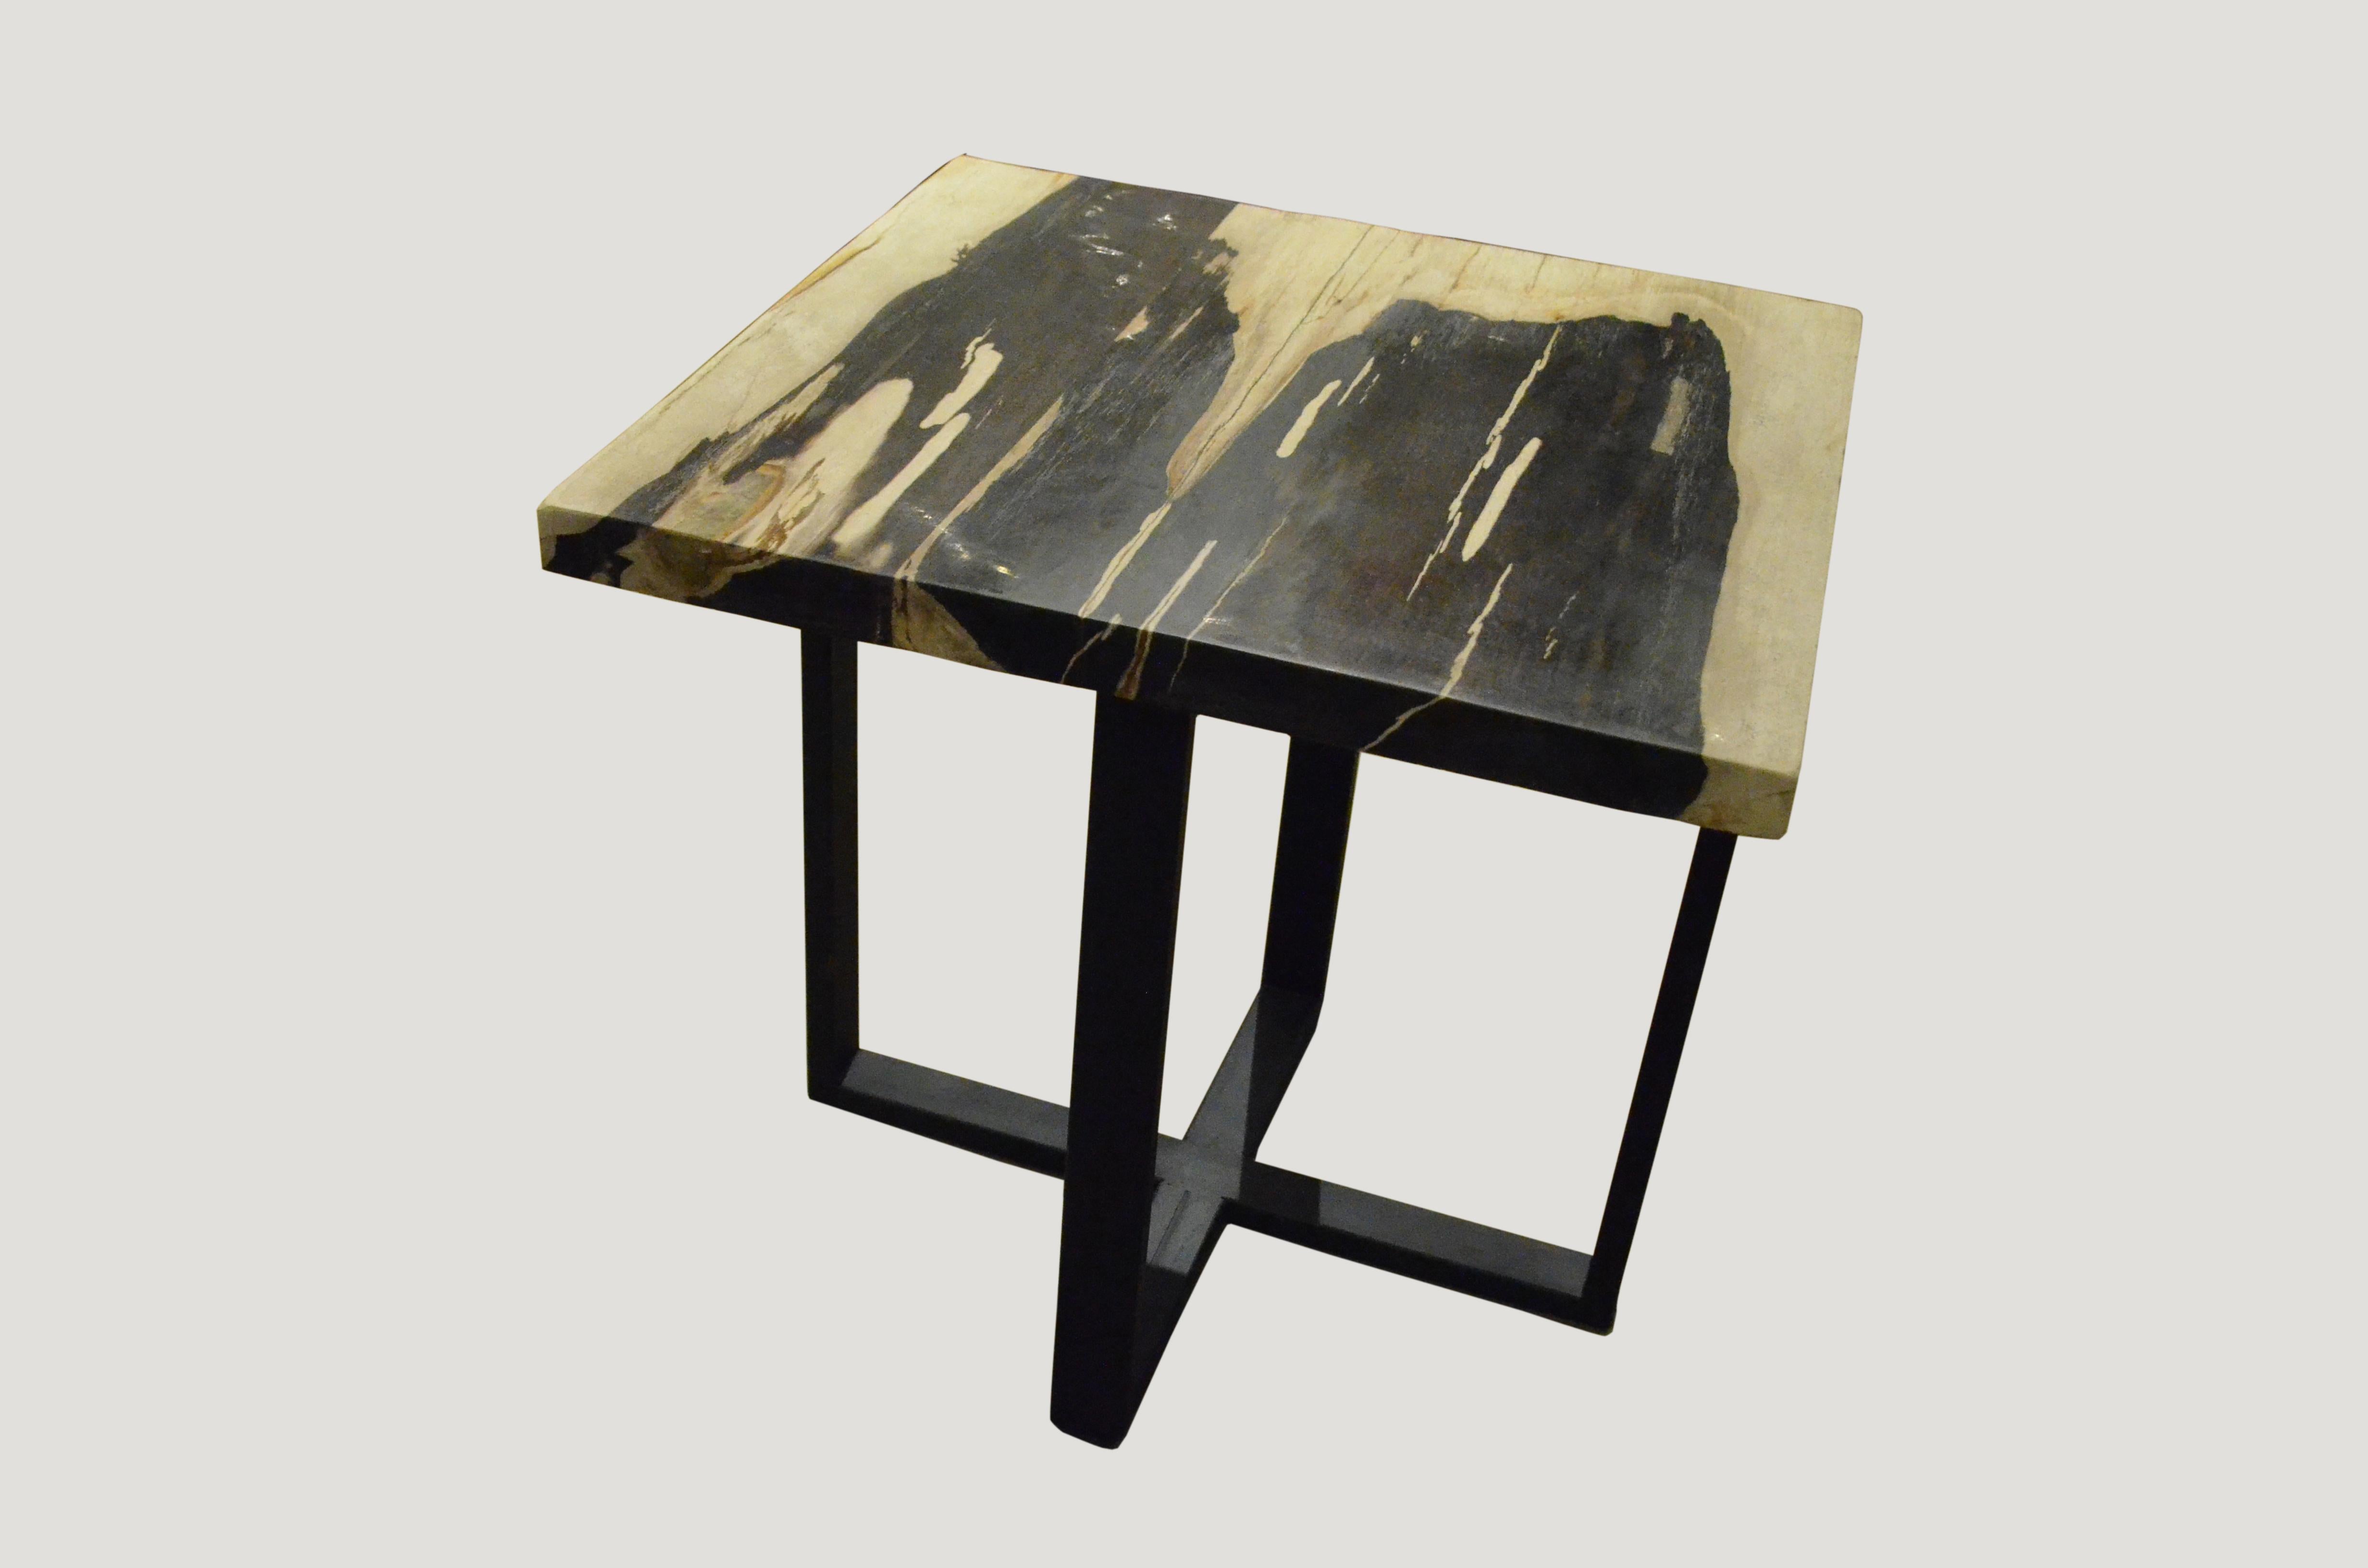 Beautiful petrified wood slab top side table in contrasting tones. Set on a modern black steel base.

As with a diamond, we polish the highest quality fossilized petrified wood, using our latest ground breaking technology, to reveal its natural